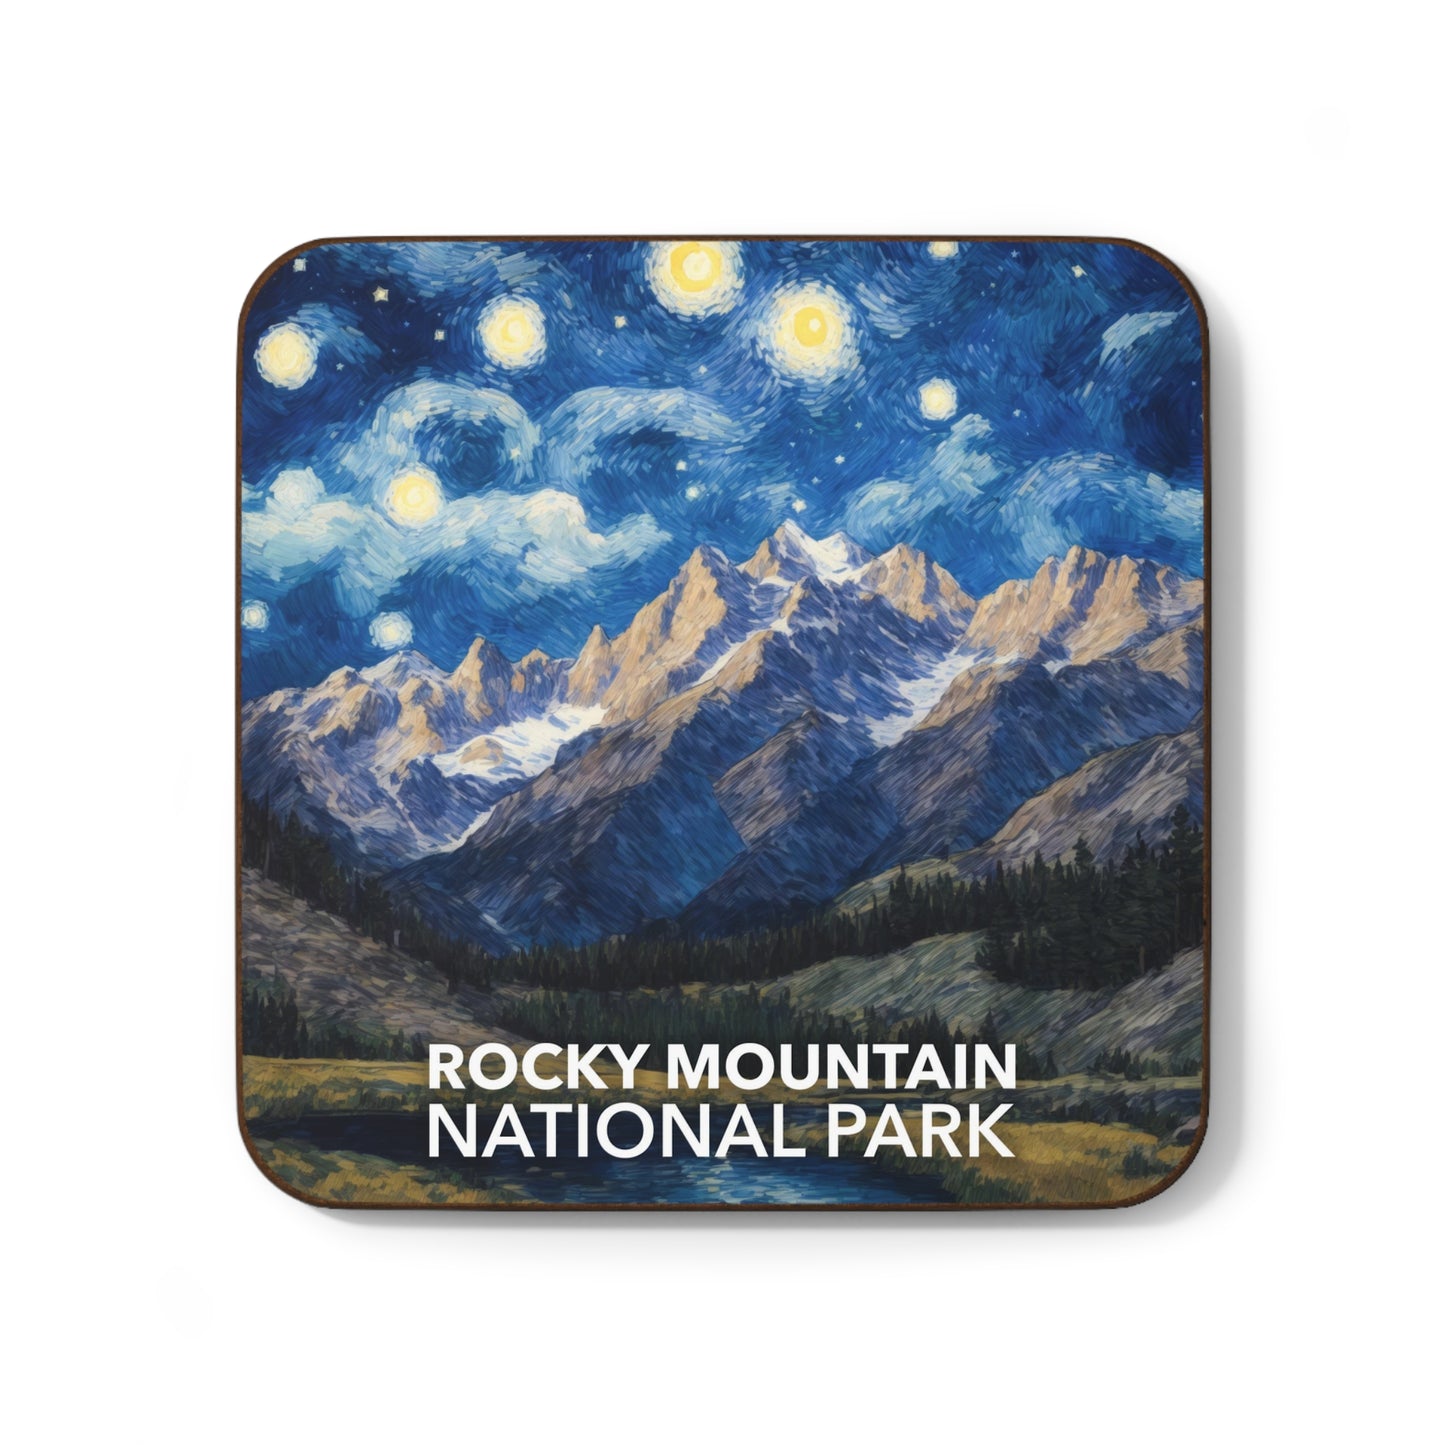 Rocky Mountain National Park Coaster - The Starry Night